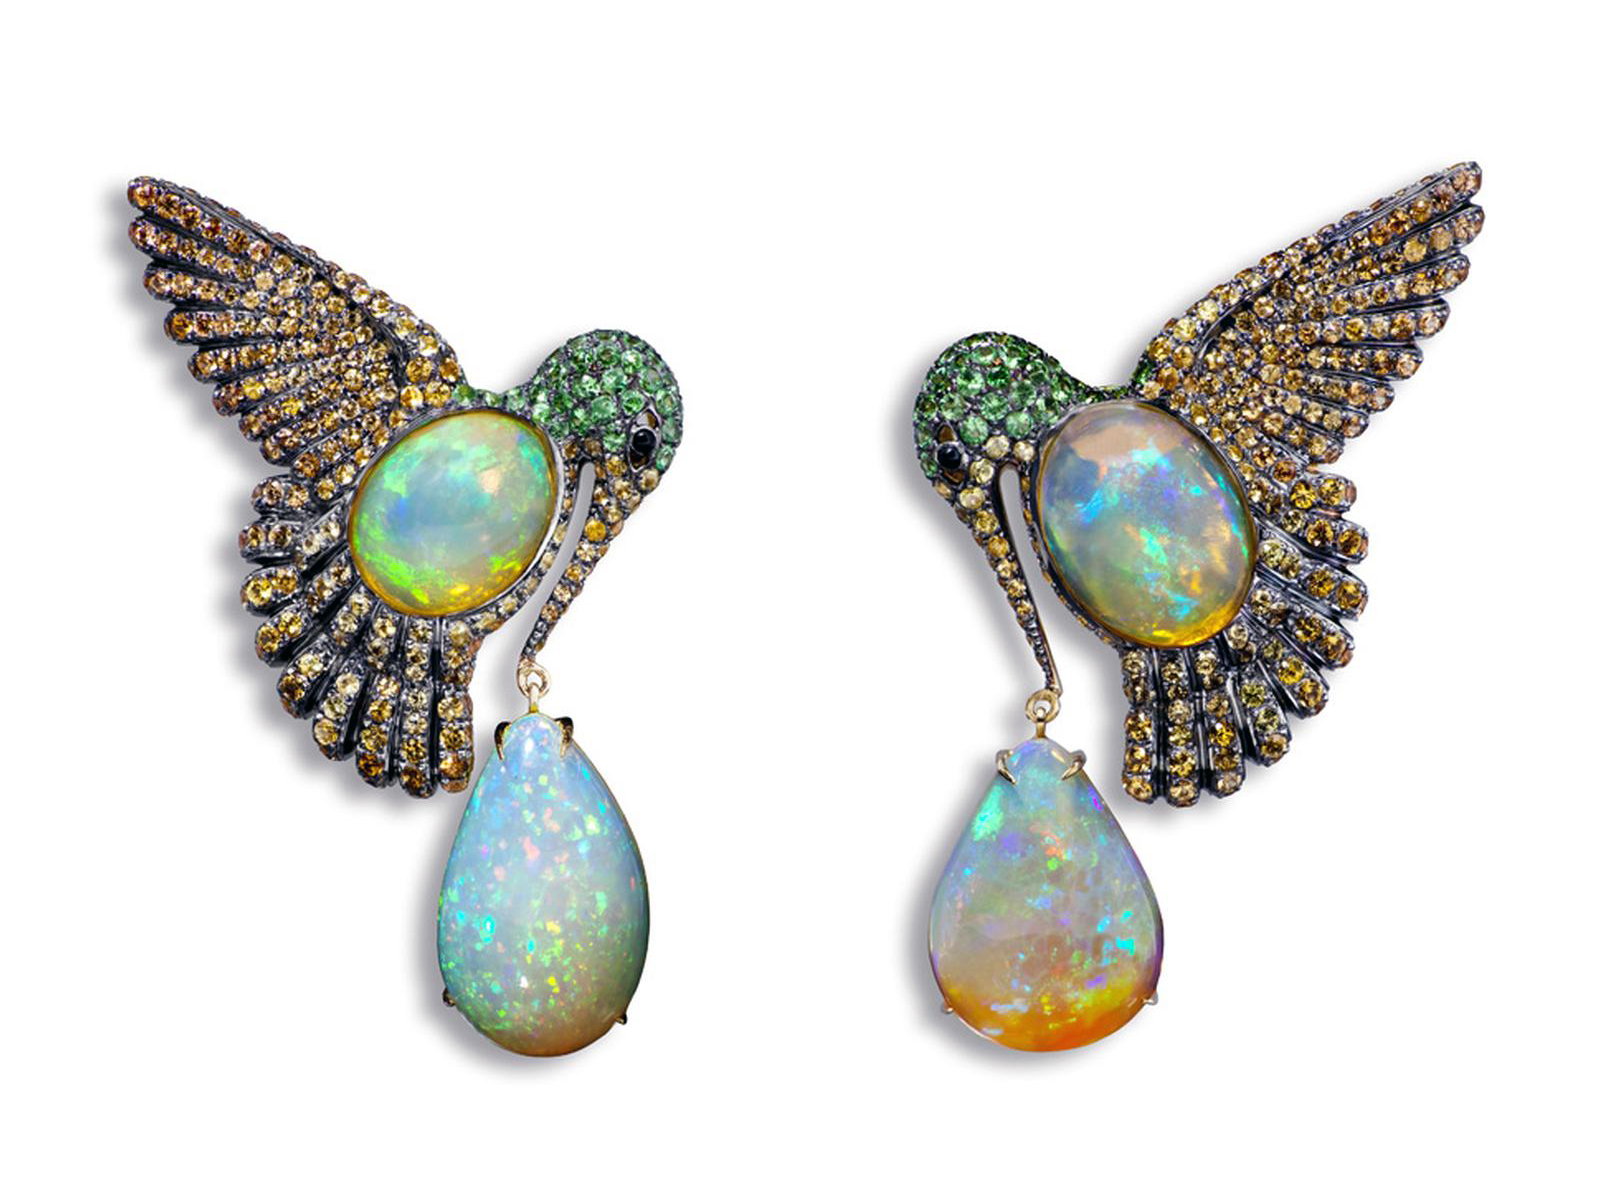 Colibri earrings by Lydia Courteille with orange mexican opals, orange sapphires, green garnet